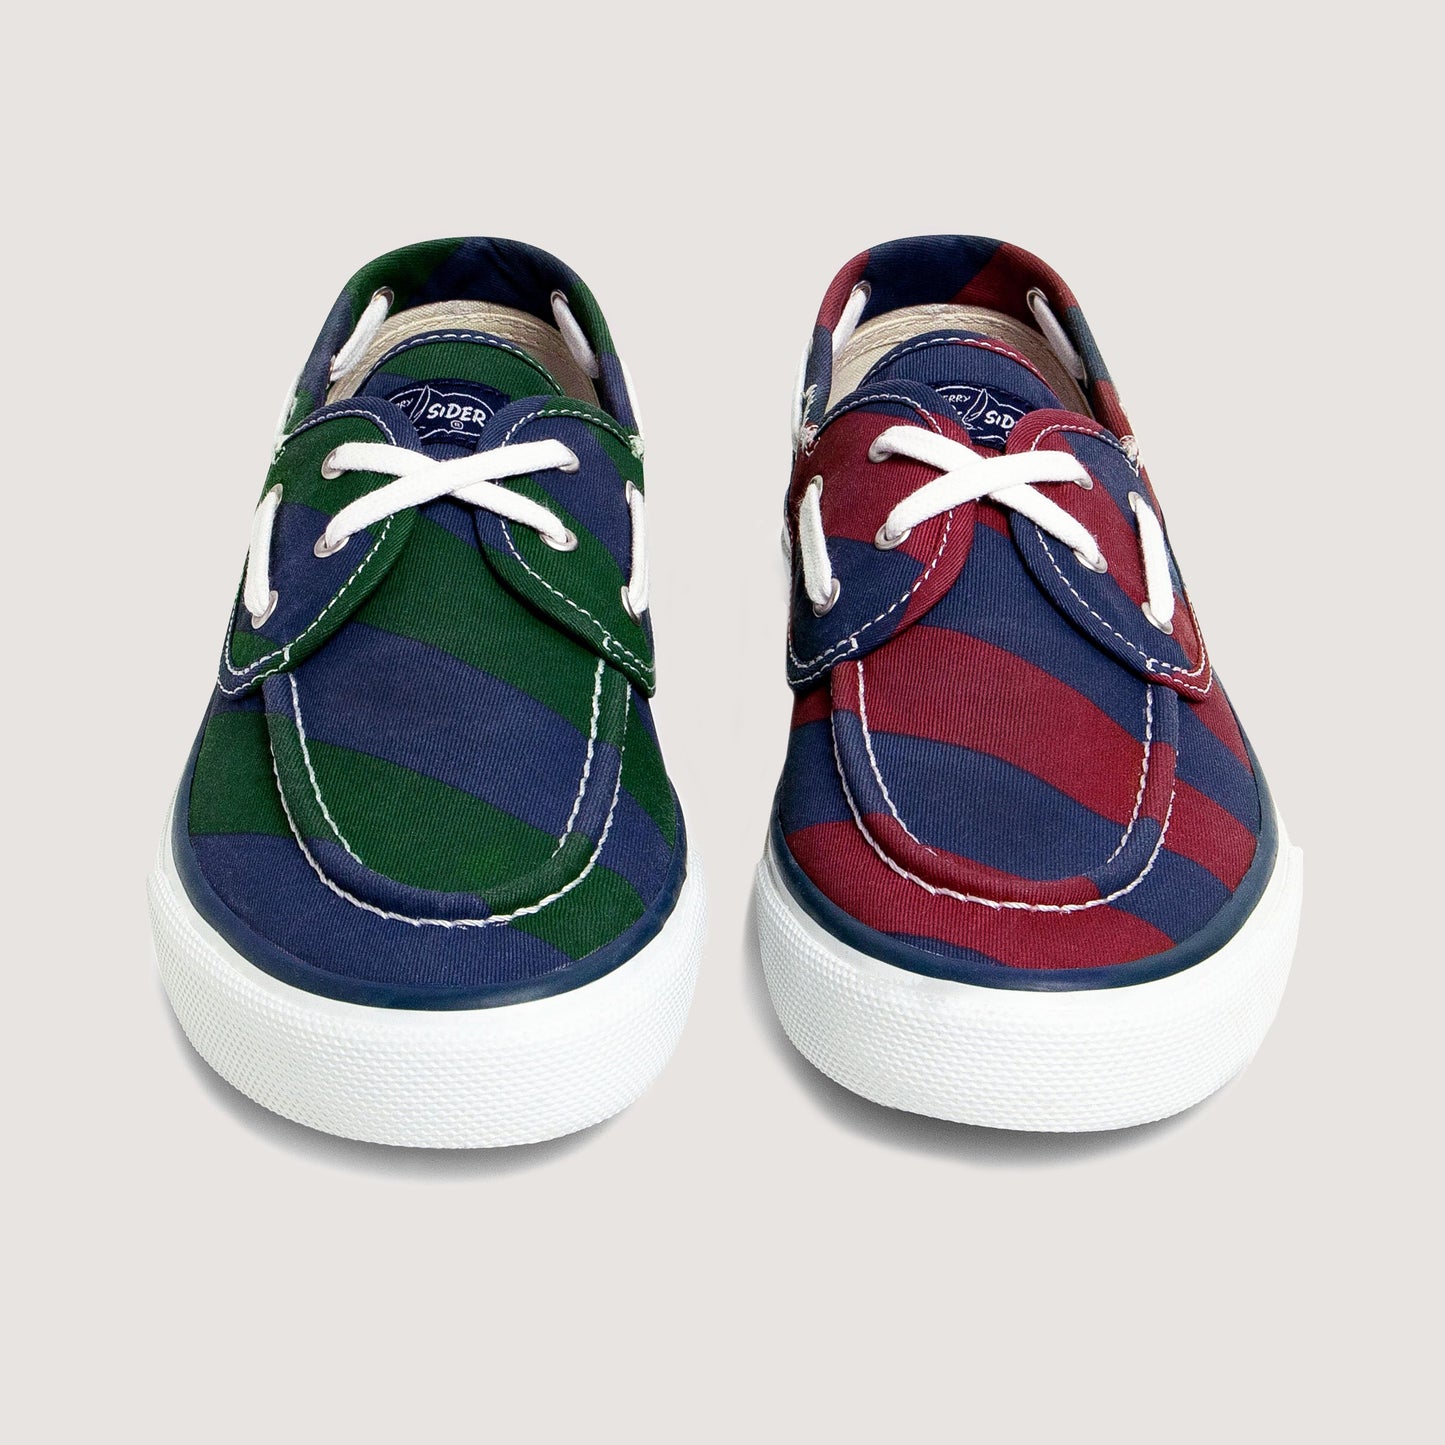 Sperry x Rowing Blazers (Mismatched Rugby Stripe Seamate)